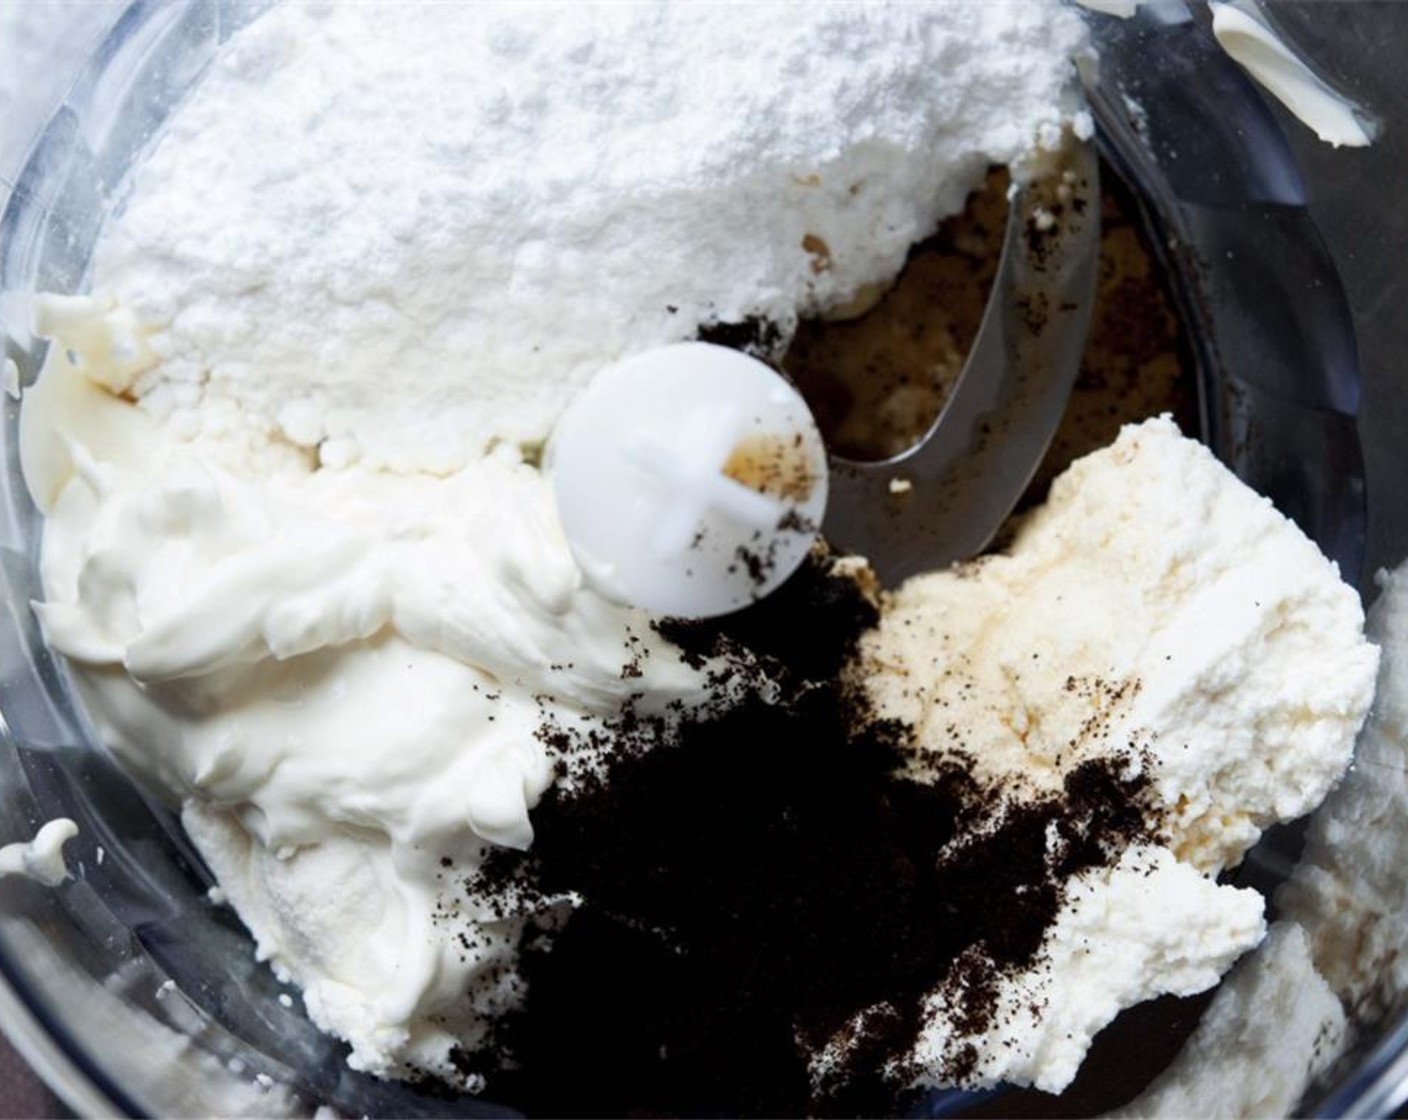 step 3 In a blender, combine the Heavy Cream (3/4 cup), Ricotta Cheese (1 cup), Ground Coffee (1 Tbsp), Powdered Confectioners Sugar (1 cup), and the Vanilla Bean Paste (1/2 tsp).